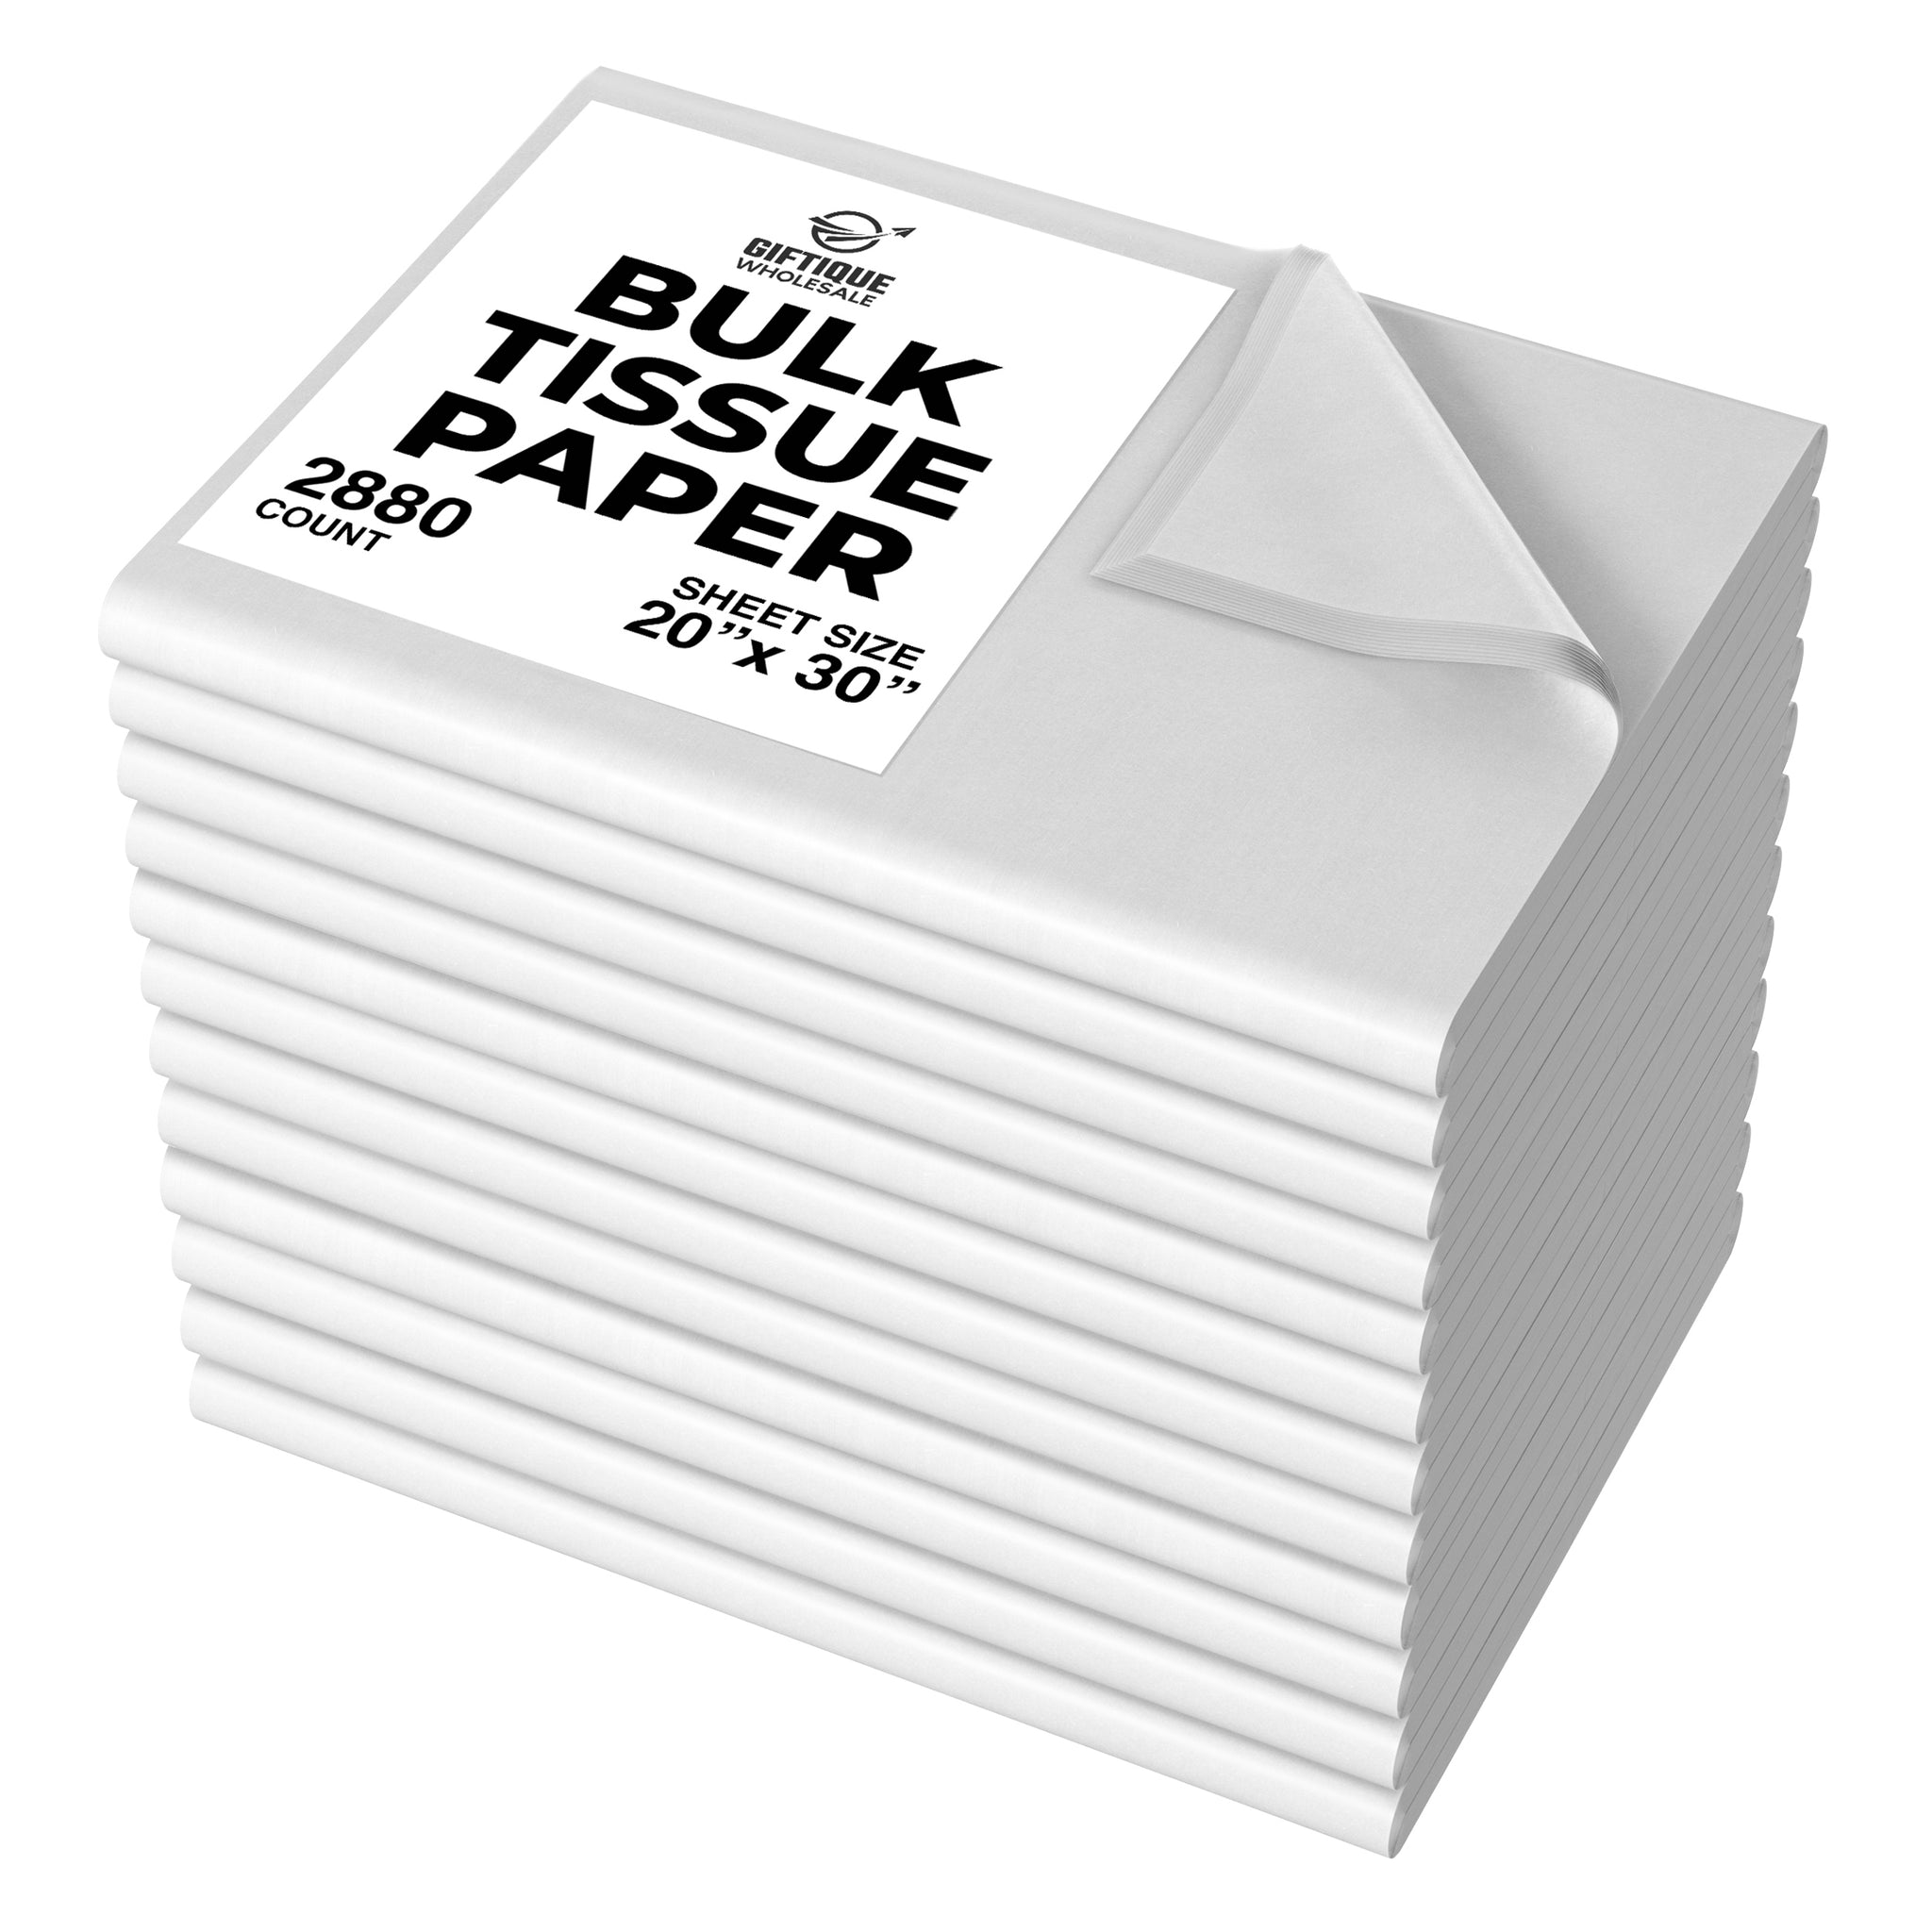 Assortment Pack Tissue Paper Sheets - 20 x 30, Black and White - ULINE - Bundle of 240 Sheets - S-21191